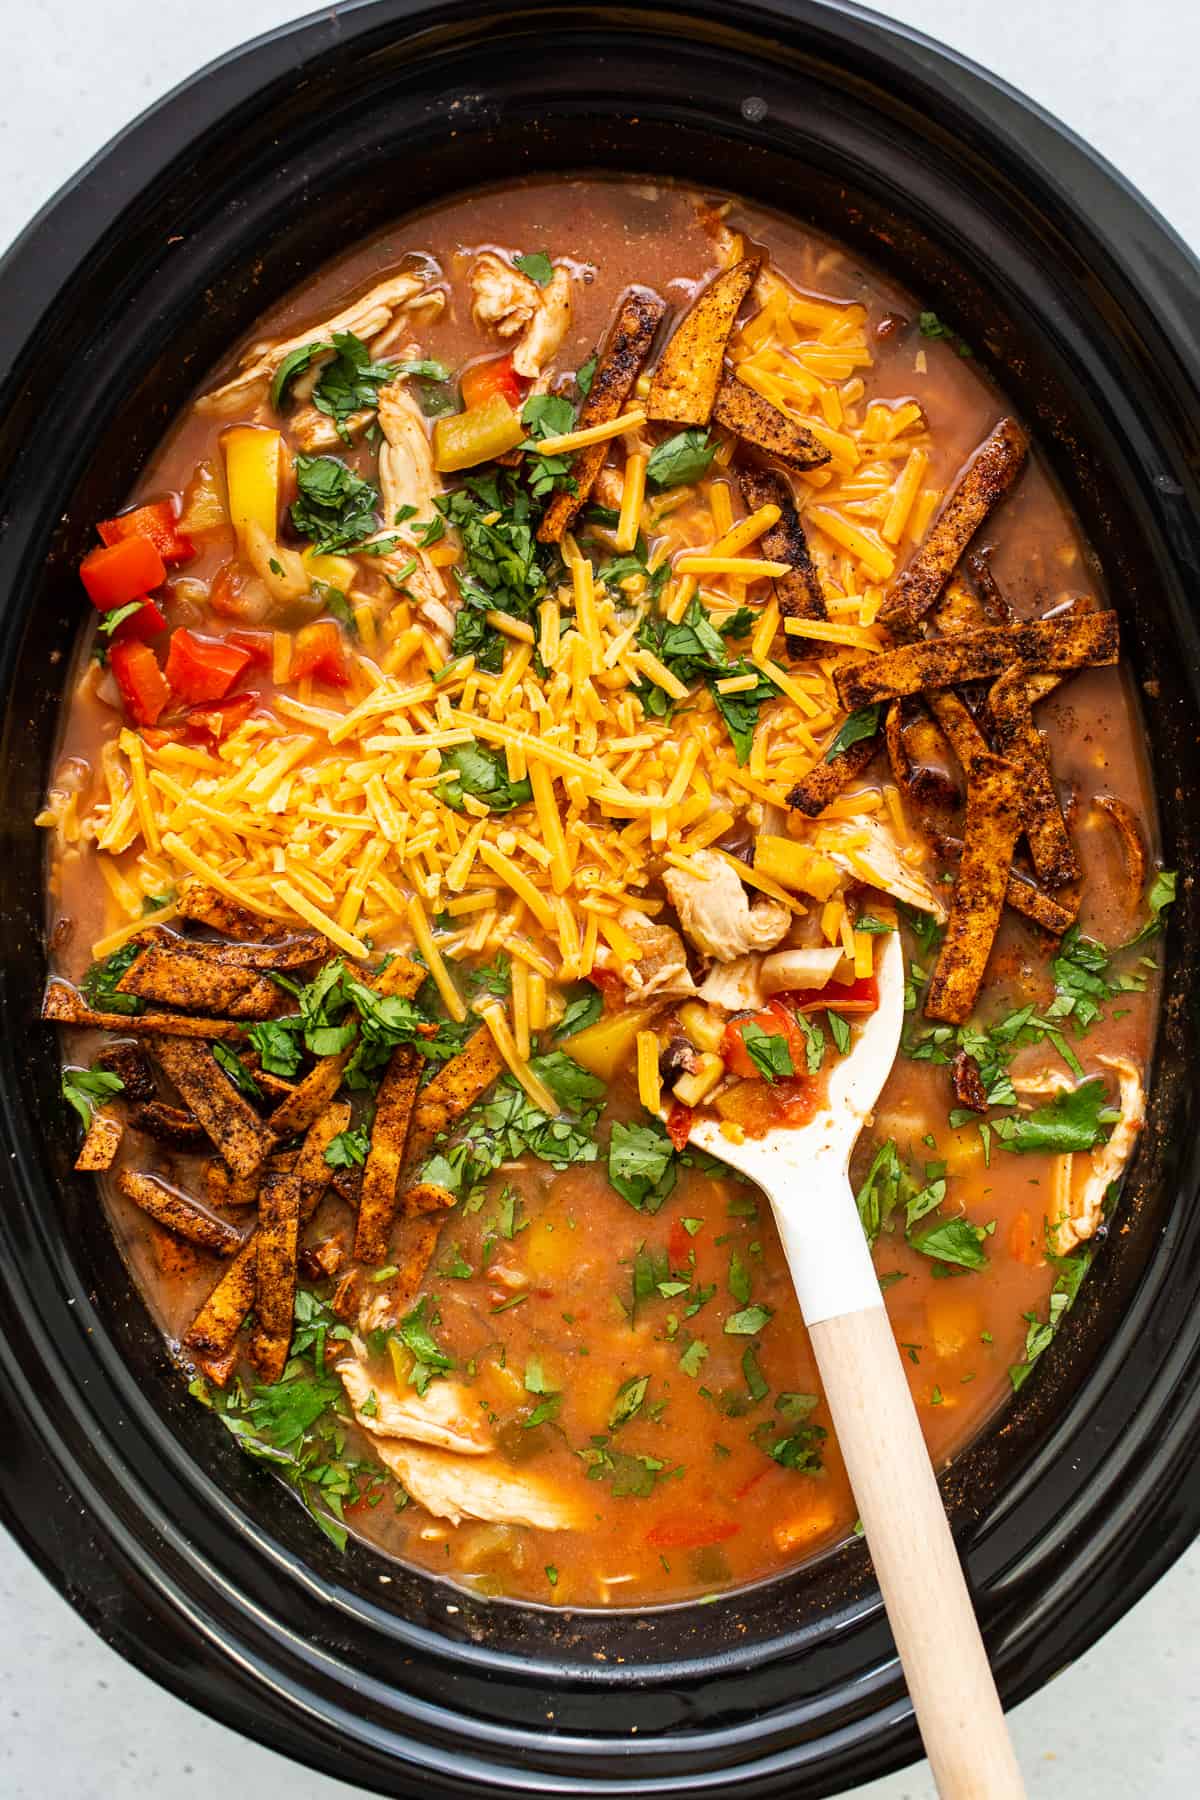 Chicken tortilla soup in a slow cooker.